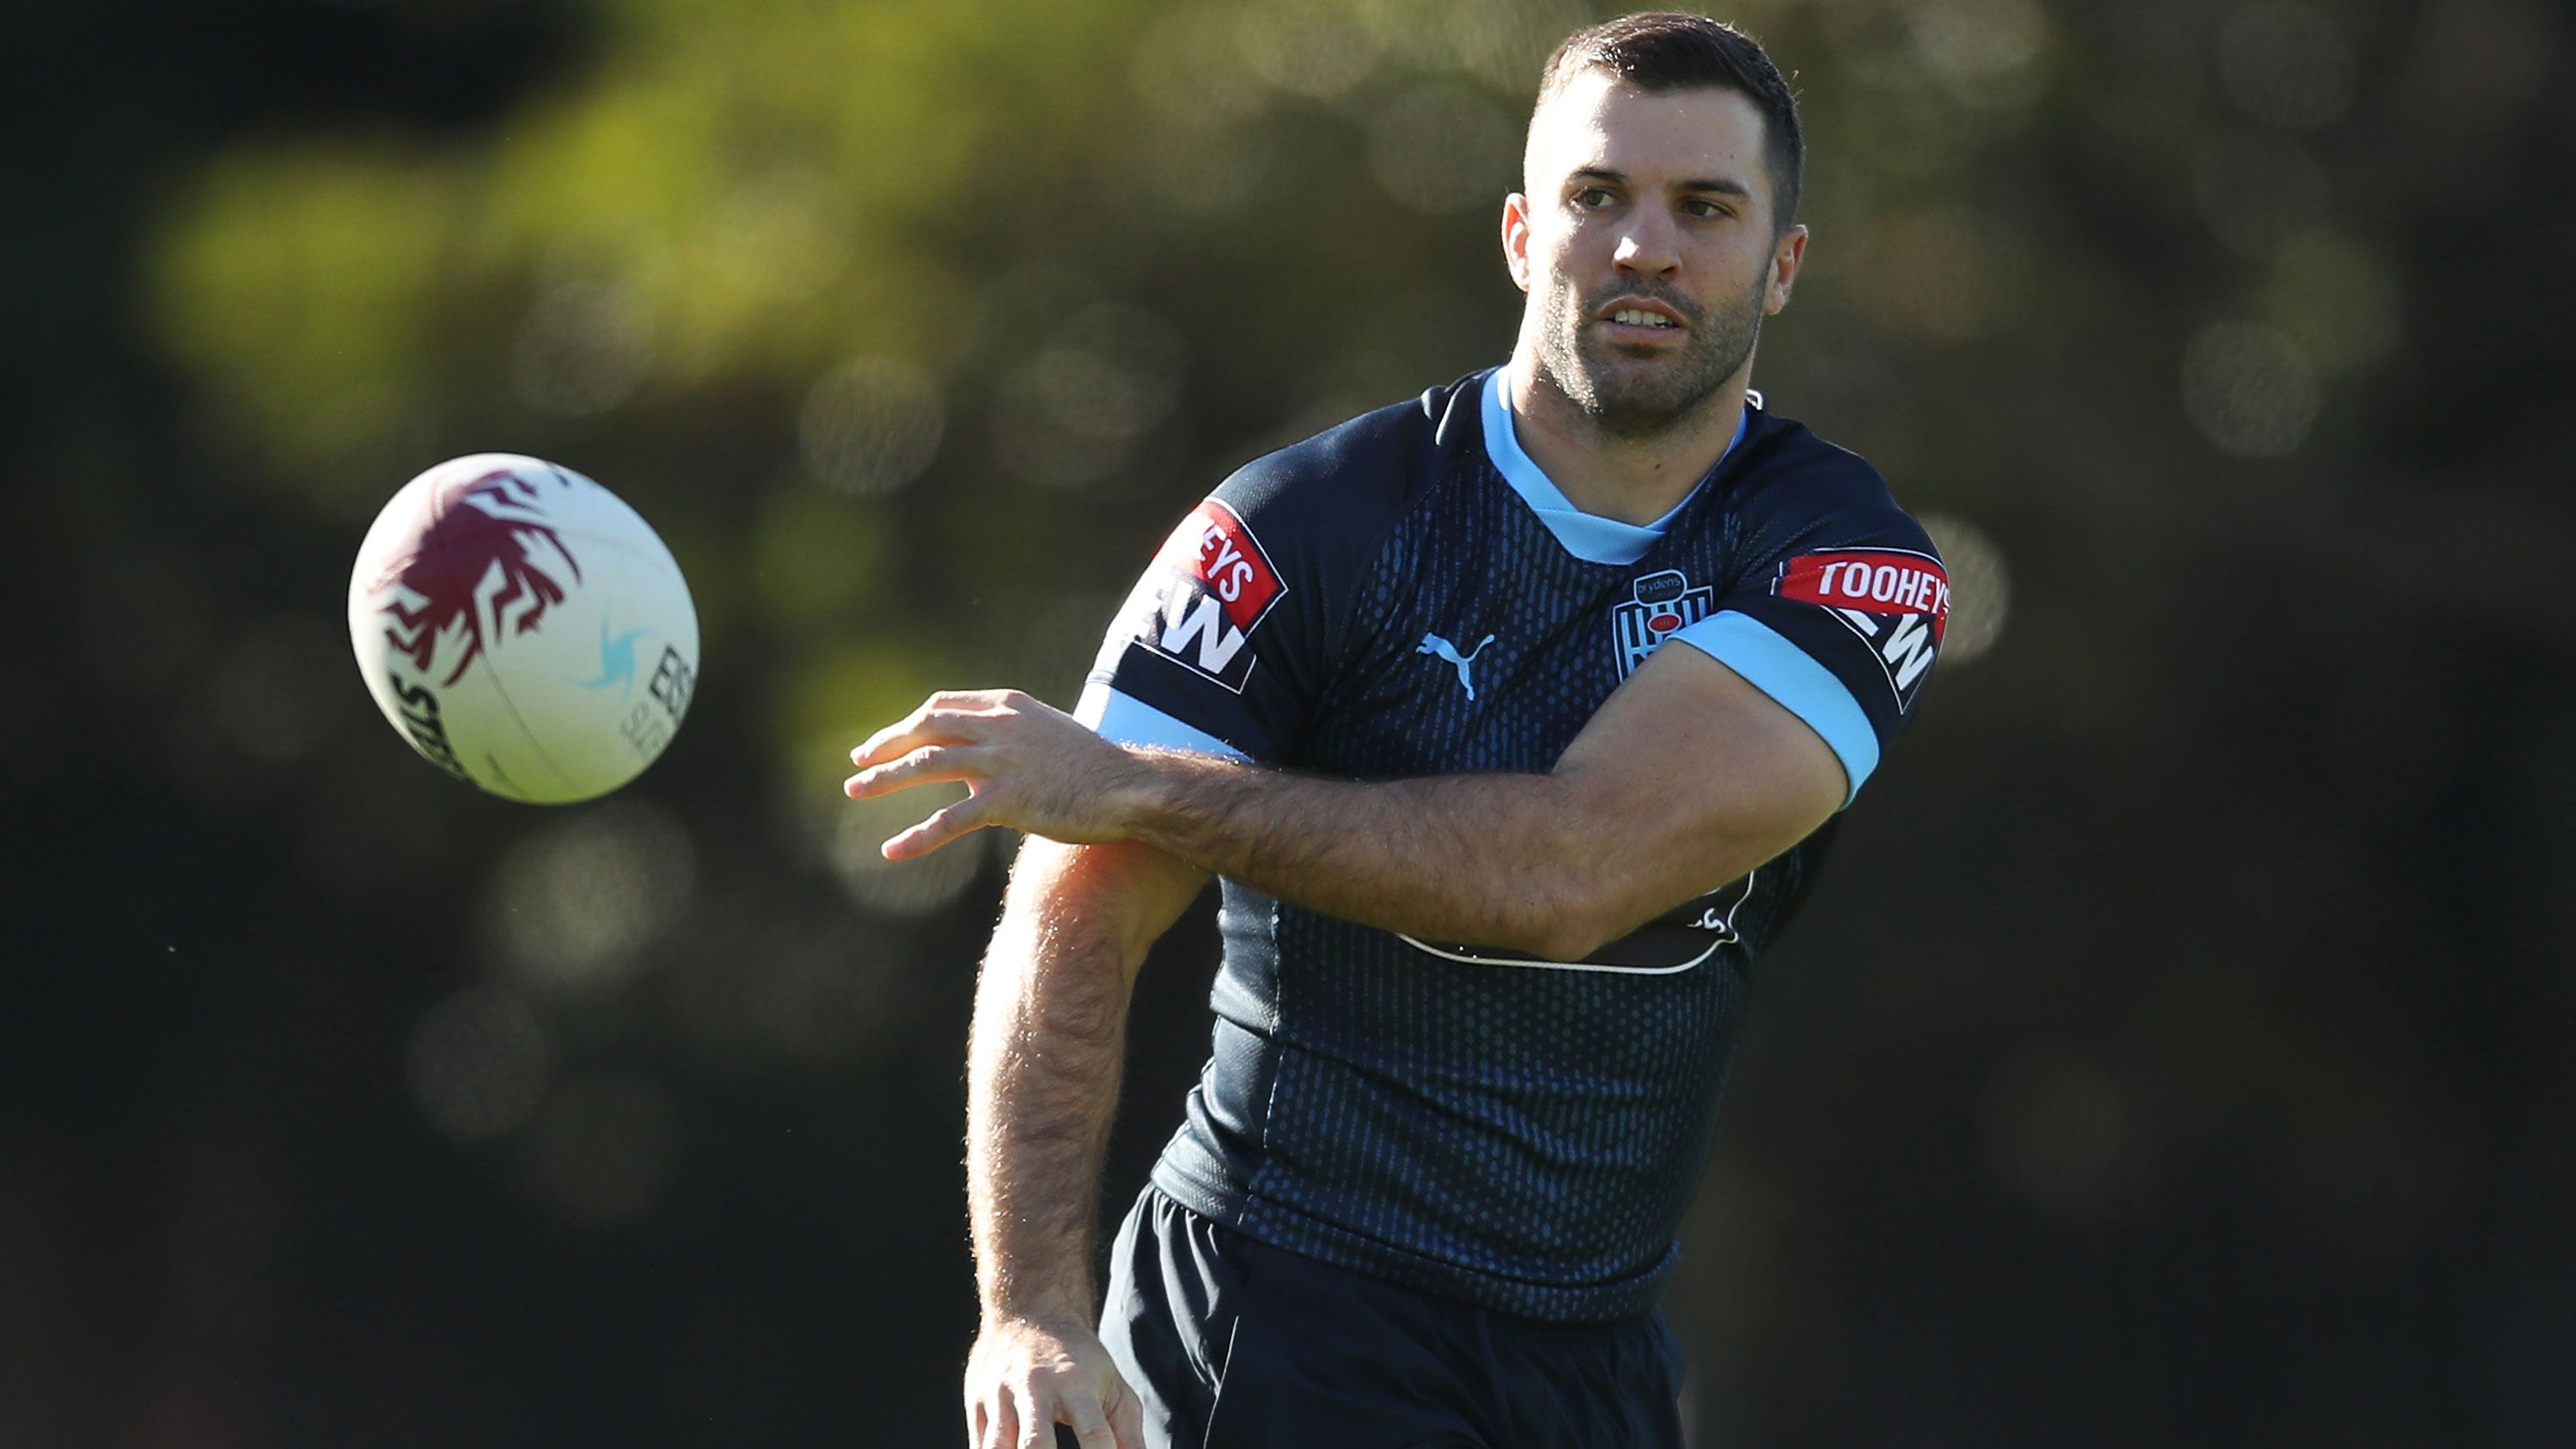 NSW fullback James Tedesco is a favourite to win man of the match.